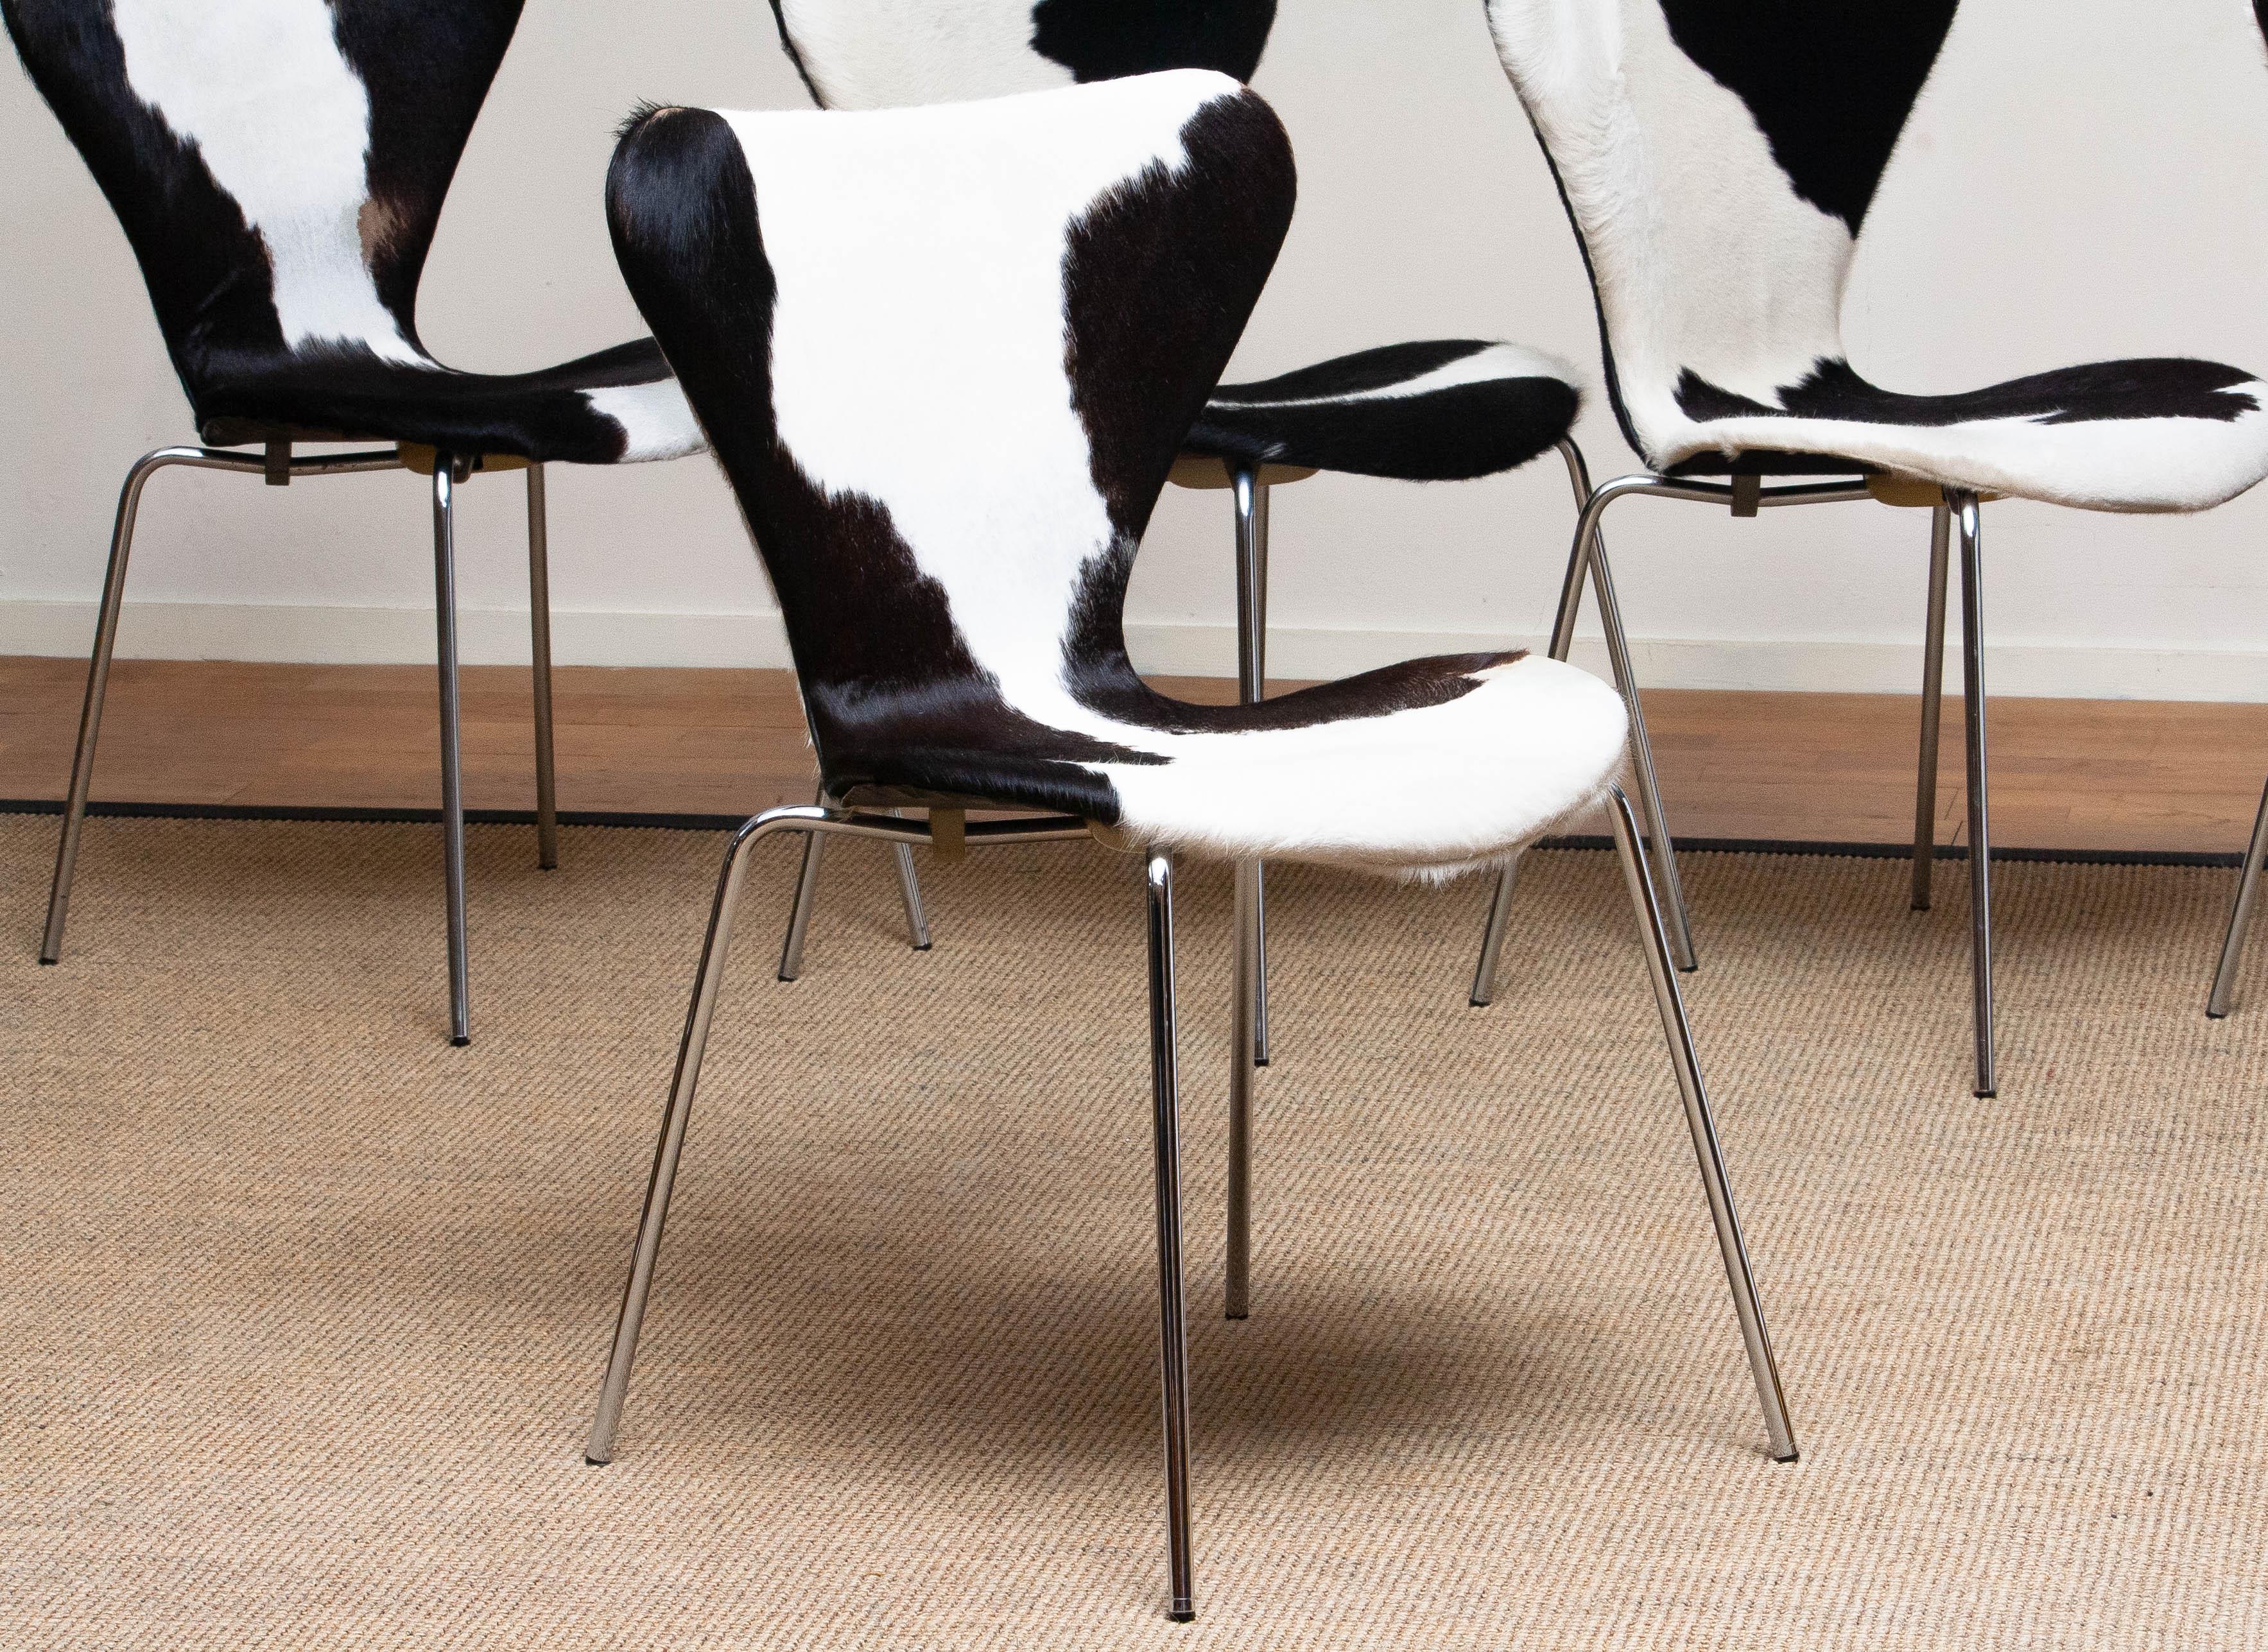 Late 20th Century 1970s, 5 Cowhide Fur Dining Chairs by Arne Jacobsen & Fritz Hansen Model 3107